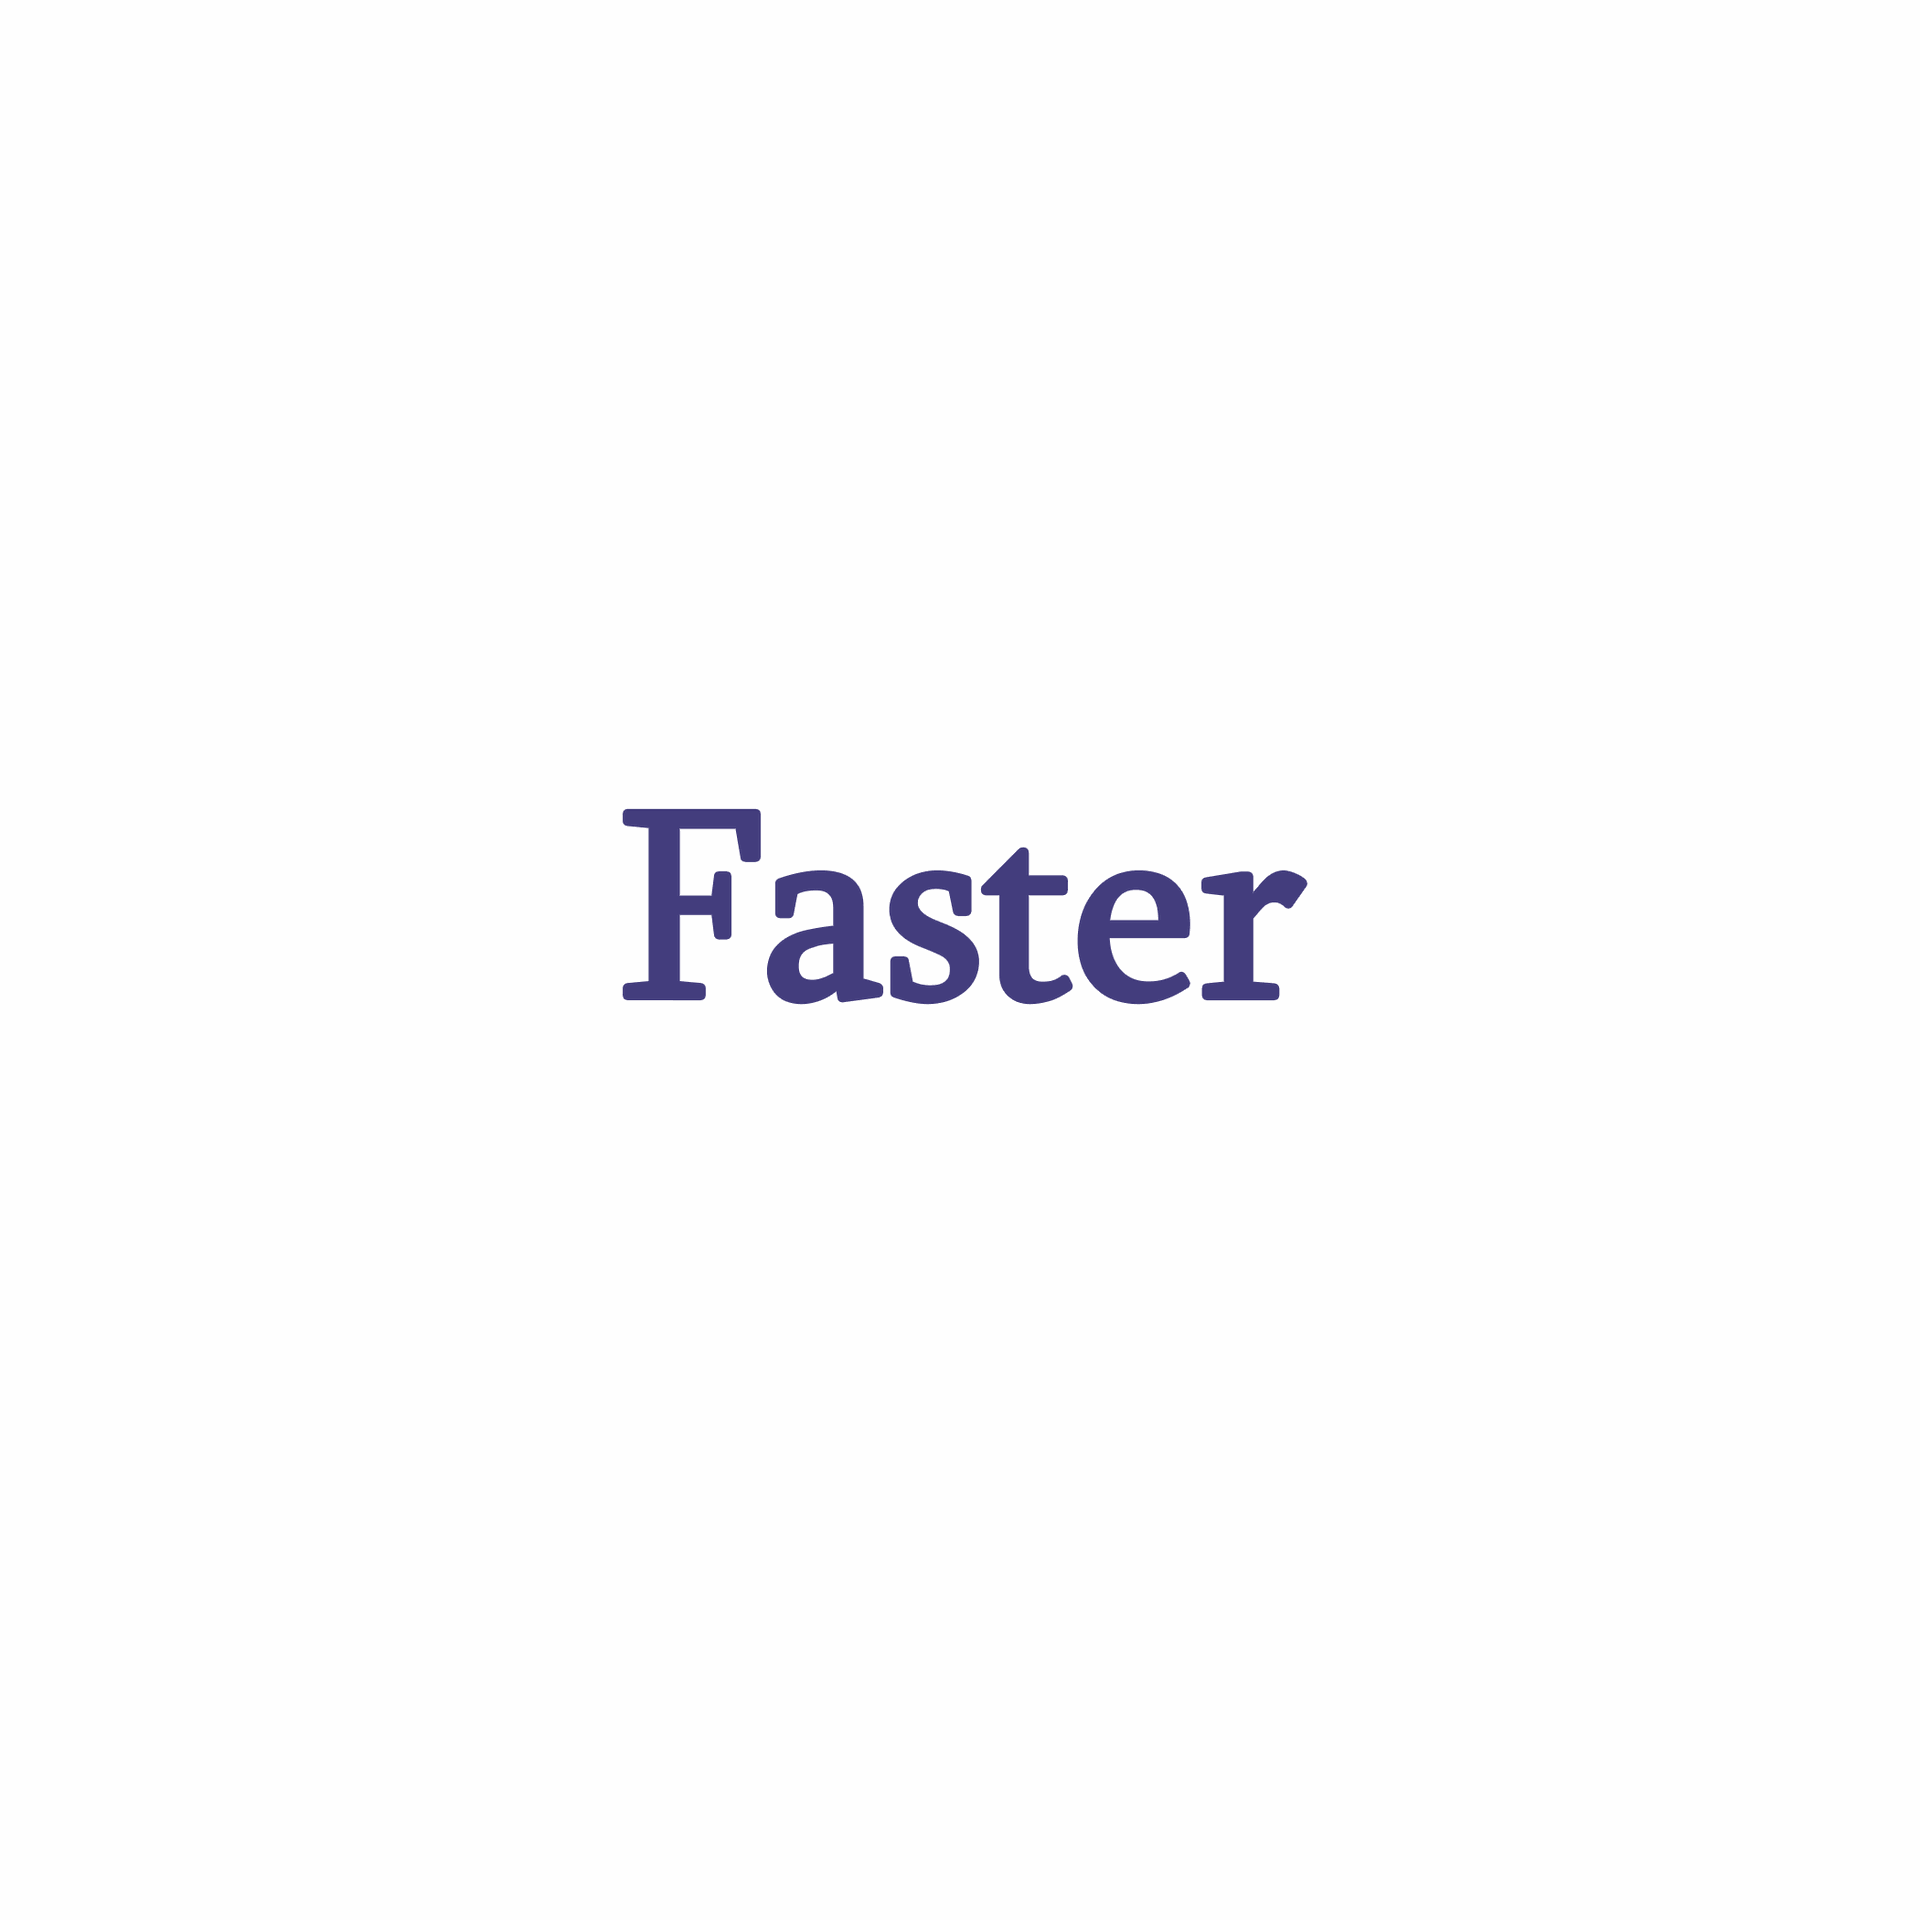 Product Brand: Faster